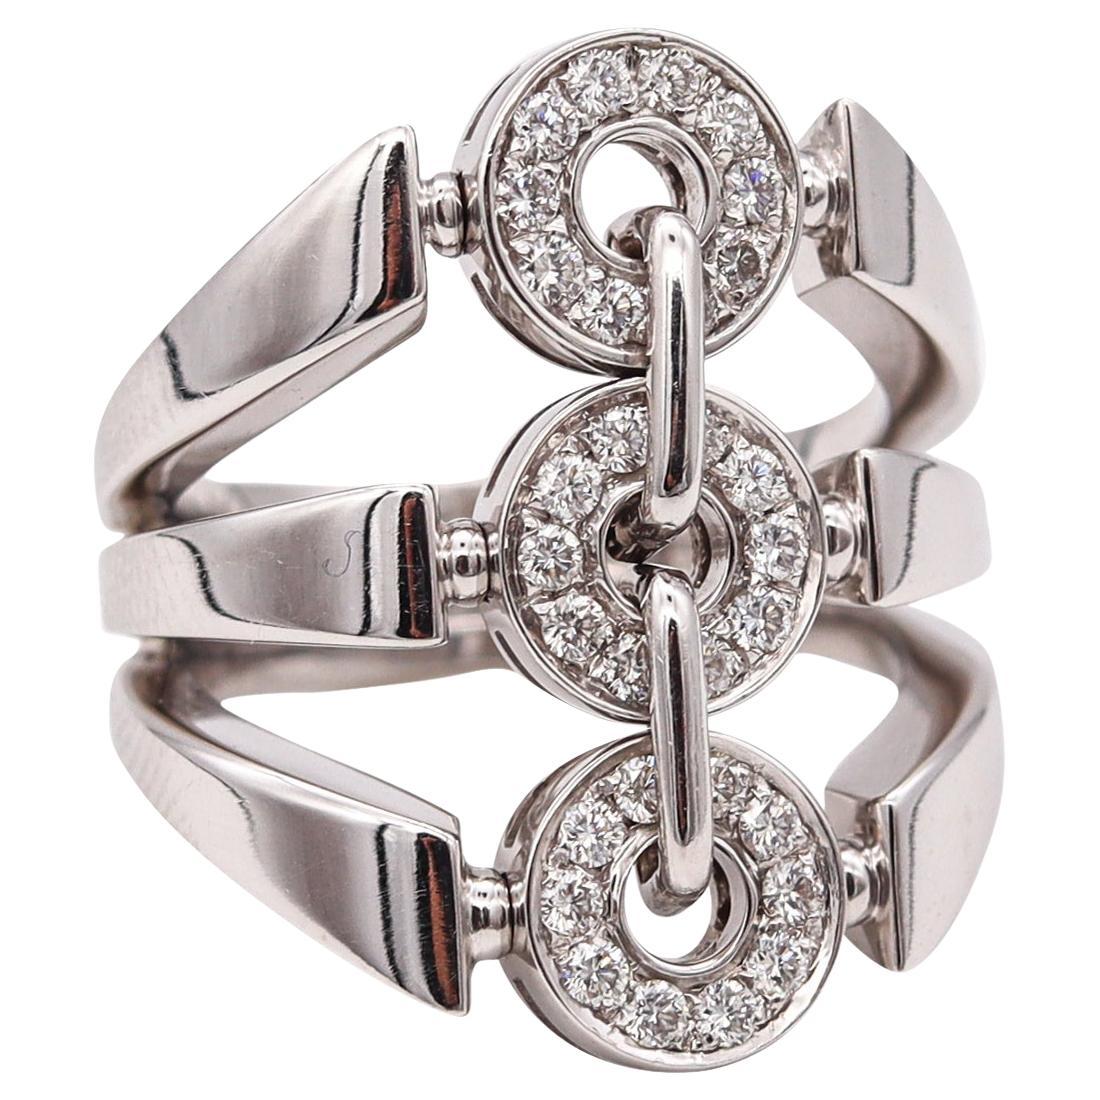 Bvlgari Roma Cocktail Ring in 18Kt White Gold with VS Round Diamonds